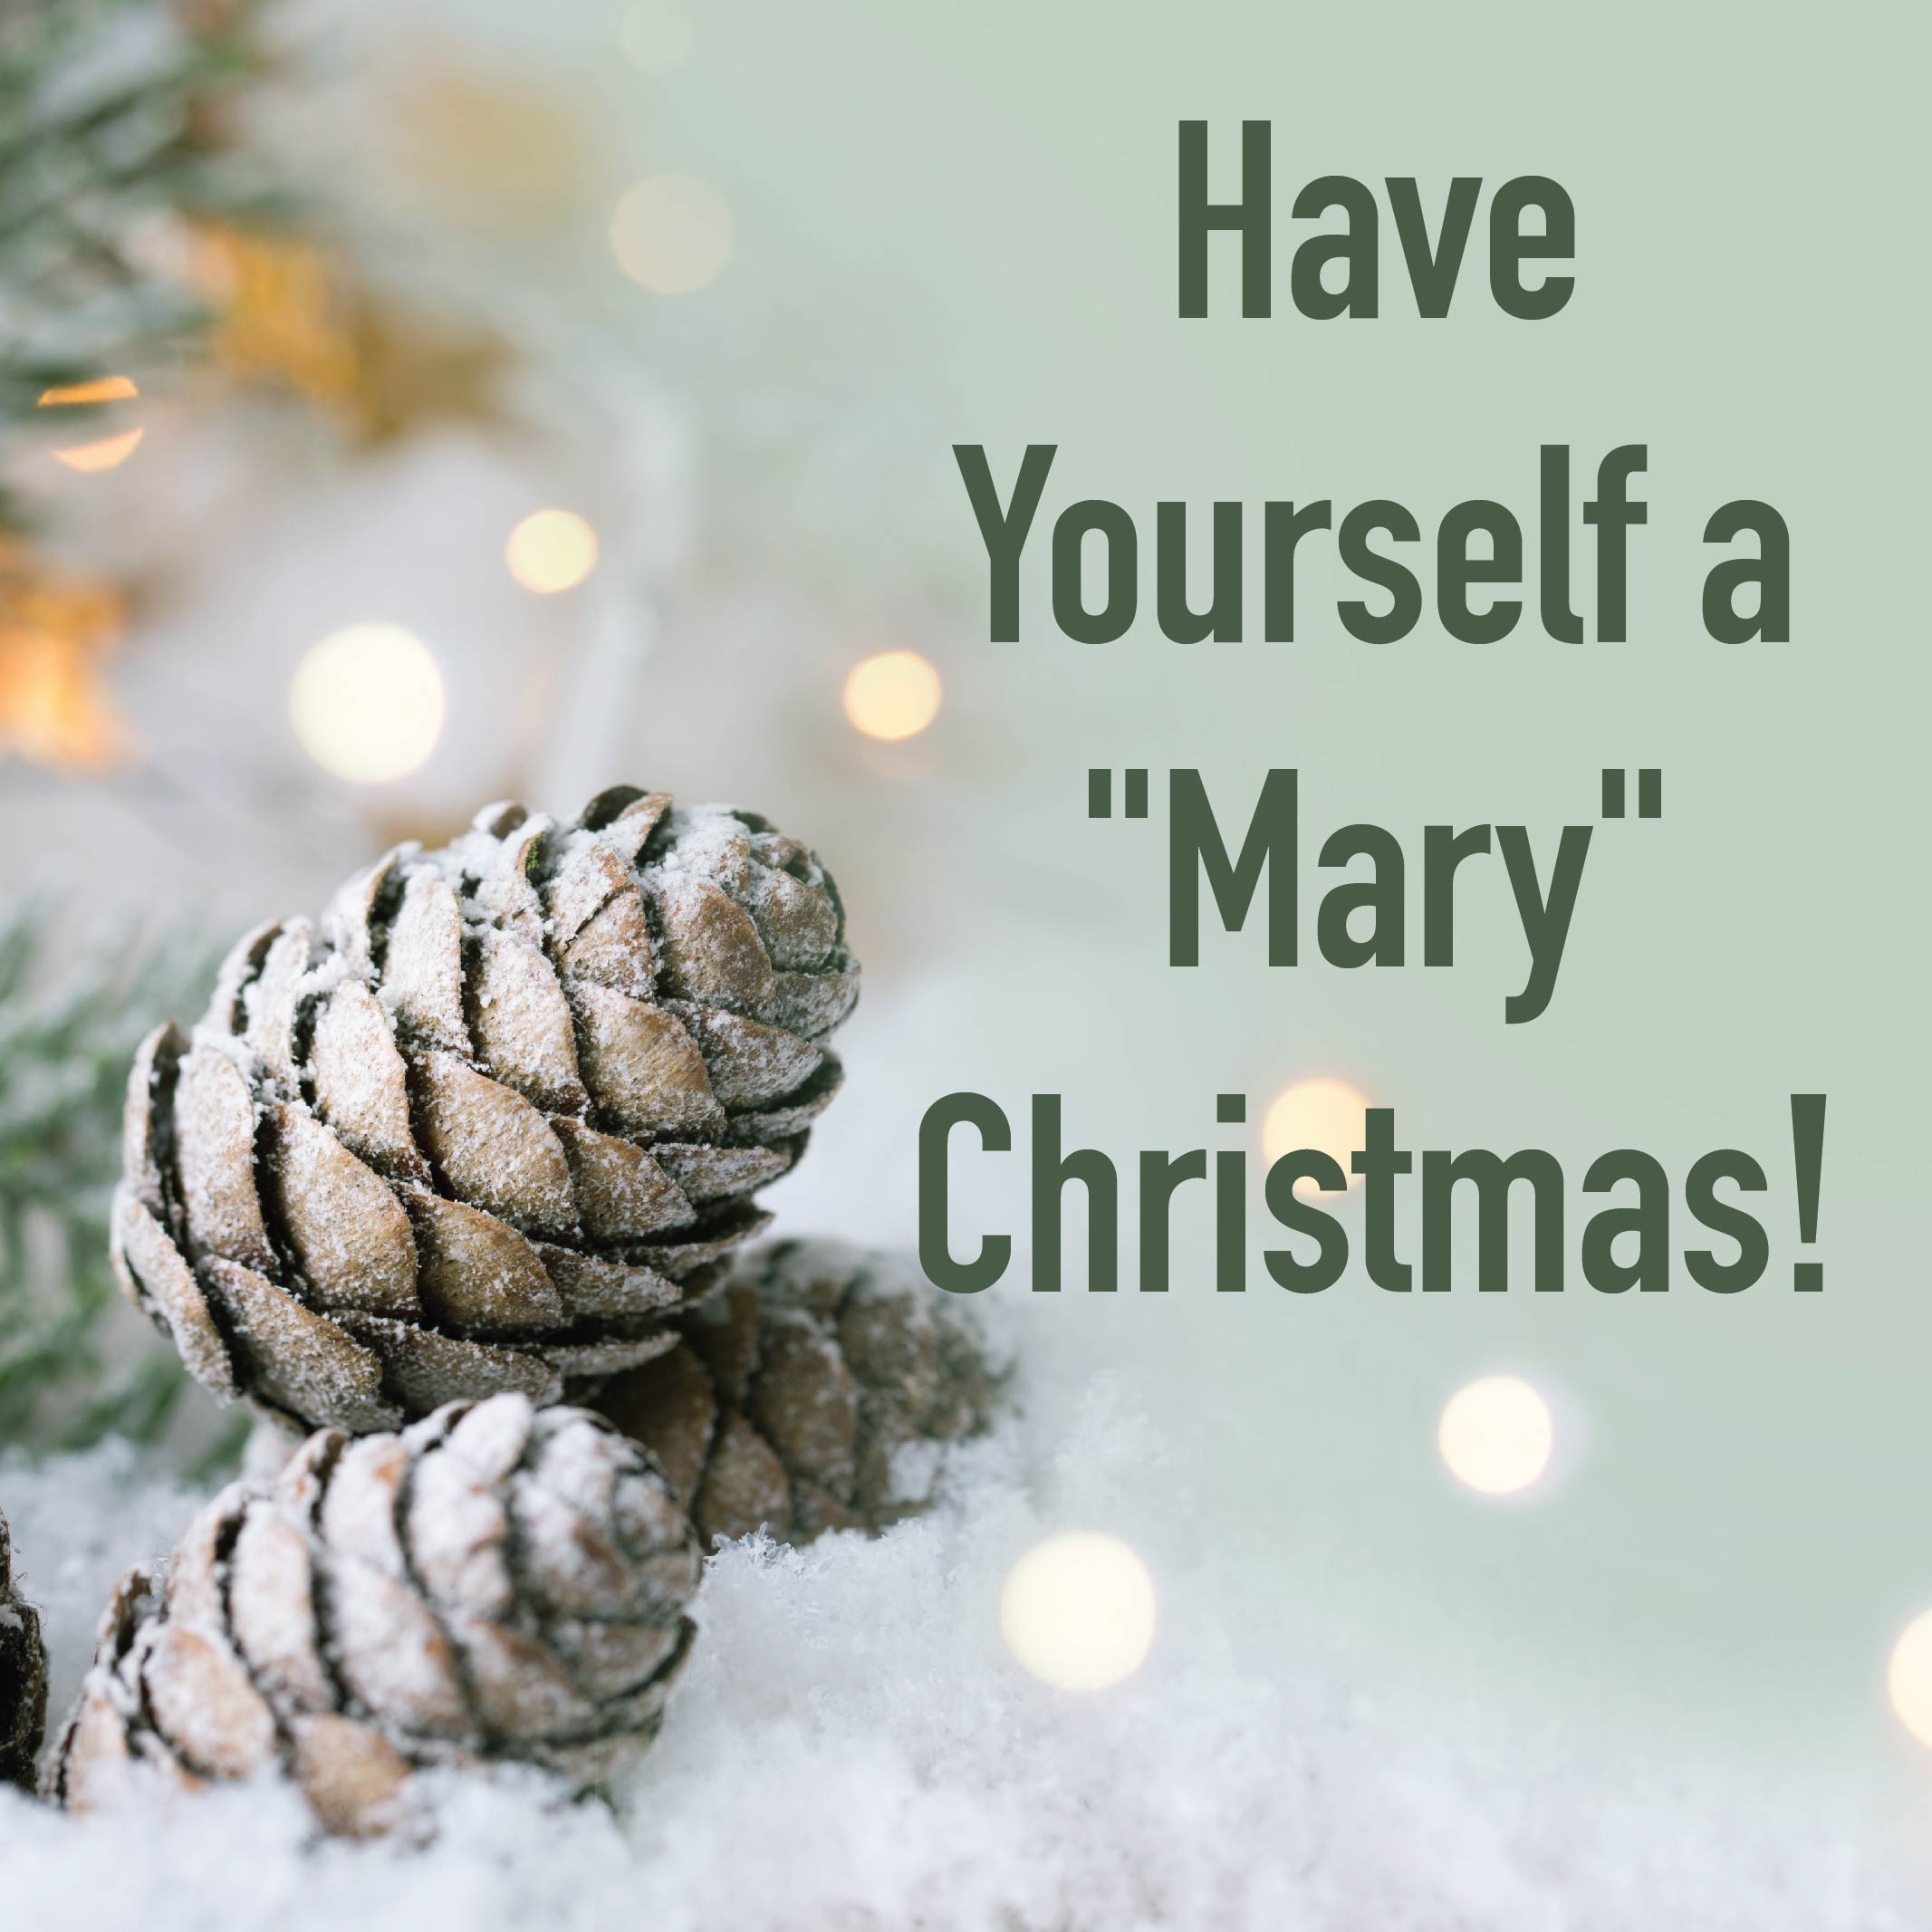 Have Yourself a “Mary” Christmas!